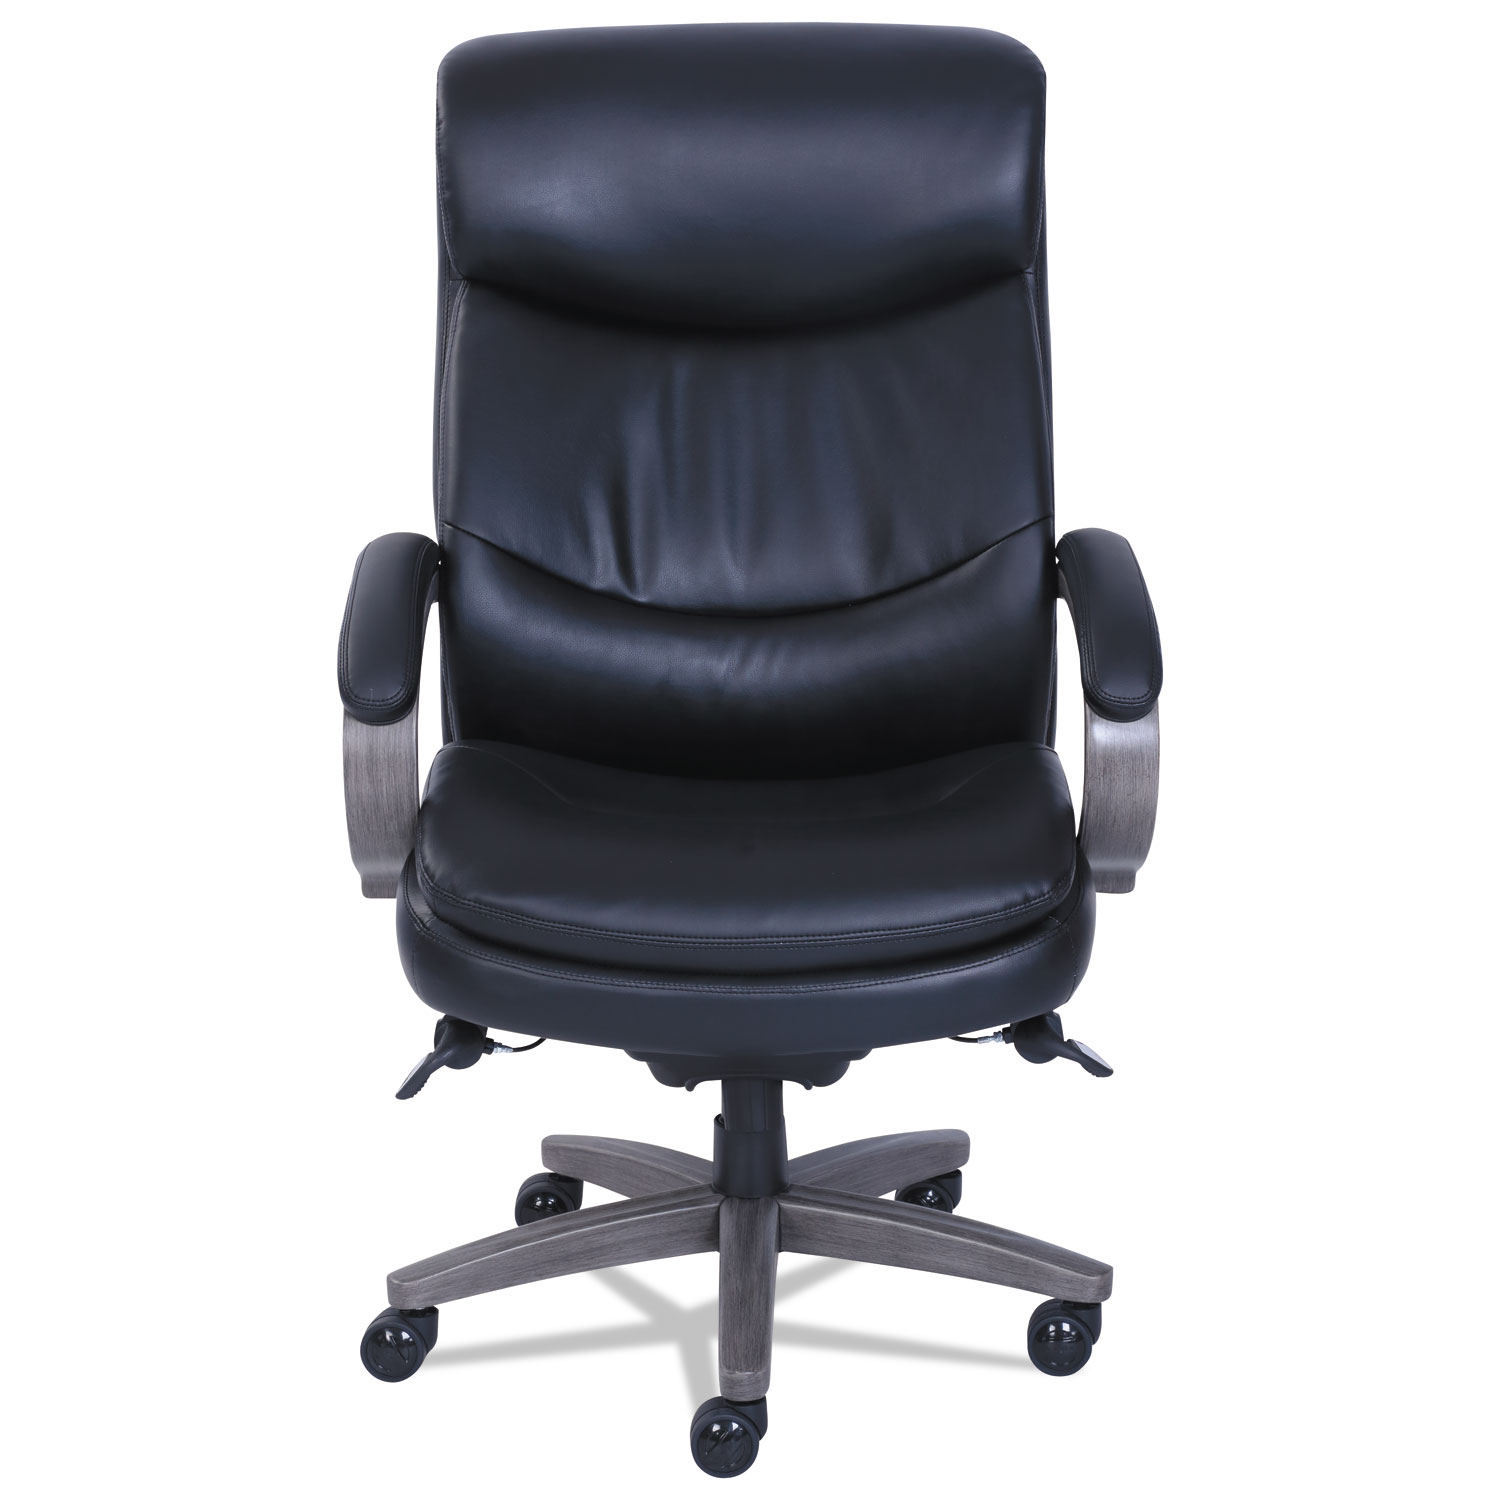 Woodbury Big and Tall Executive Chair, Supports up to 400 lbs., Black Seat/Black Back, Weathered Gray Base